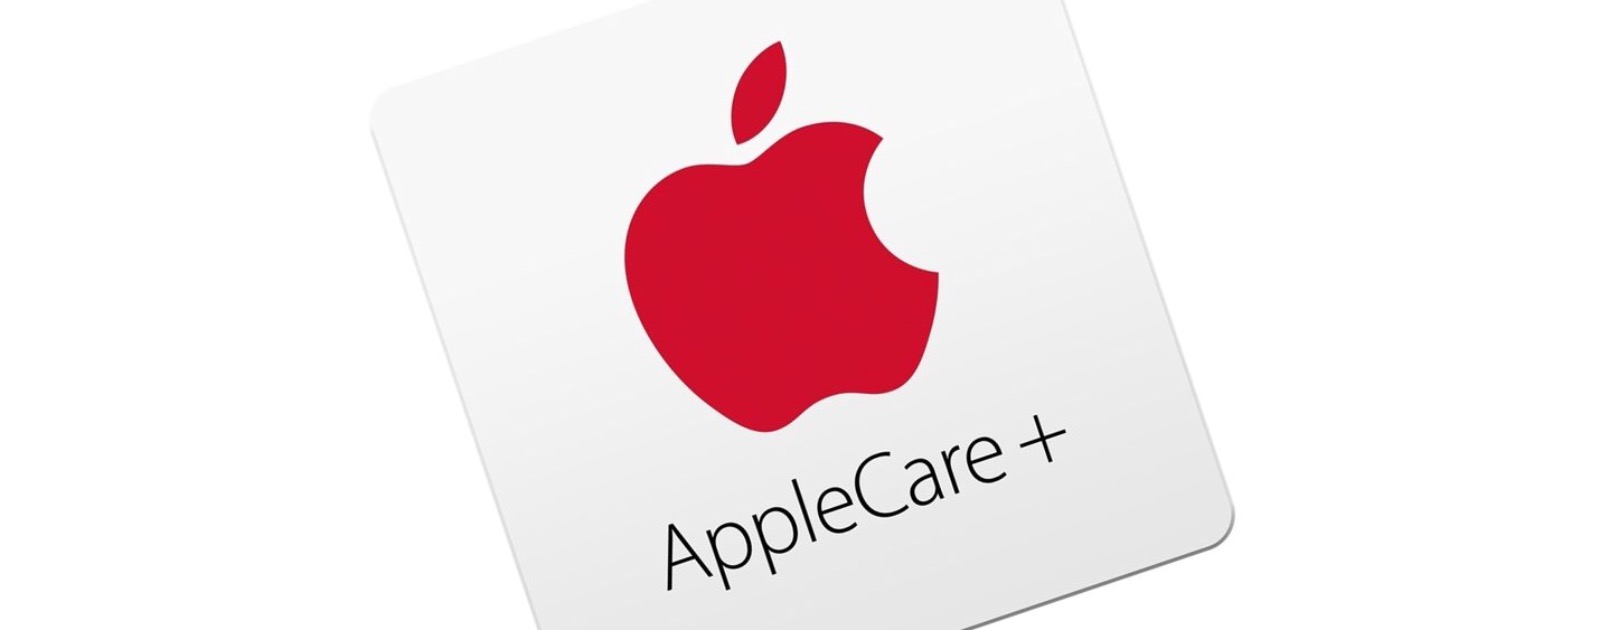 AppleCare + wins plan against theft and loss of iPhones